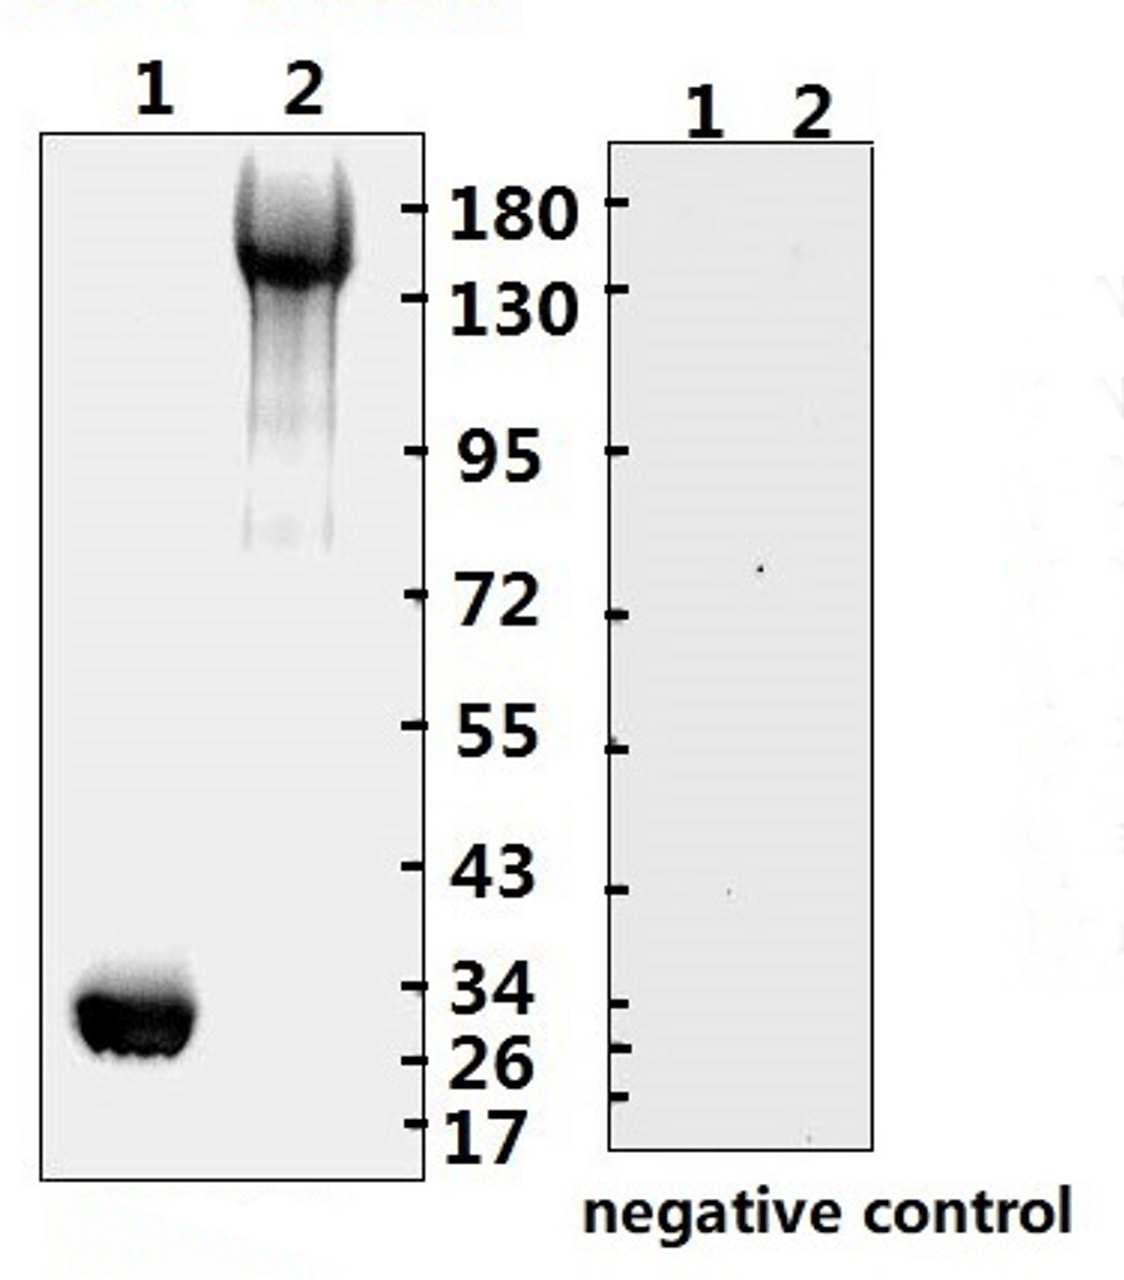 <strong>Figure 1 Western Blot Validation with Recombinant Protein</strong><br>Loading: 10ug of recombinant protein per lane. Lane 1: 10-008 and Lane 2: 10-011. Antibodies: SARS-CoV-2 (COVID-19) Spike-ECD/RBD Monoclonal, 10-553, 1:1000. Secondary: Goat anti-human IgG HRP conjugate at 1:5000 dilution.